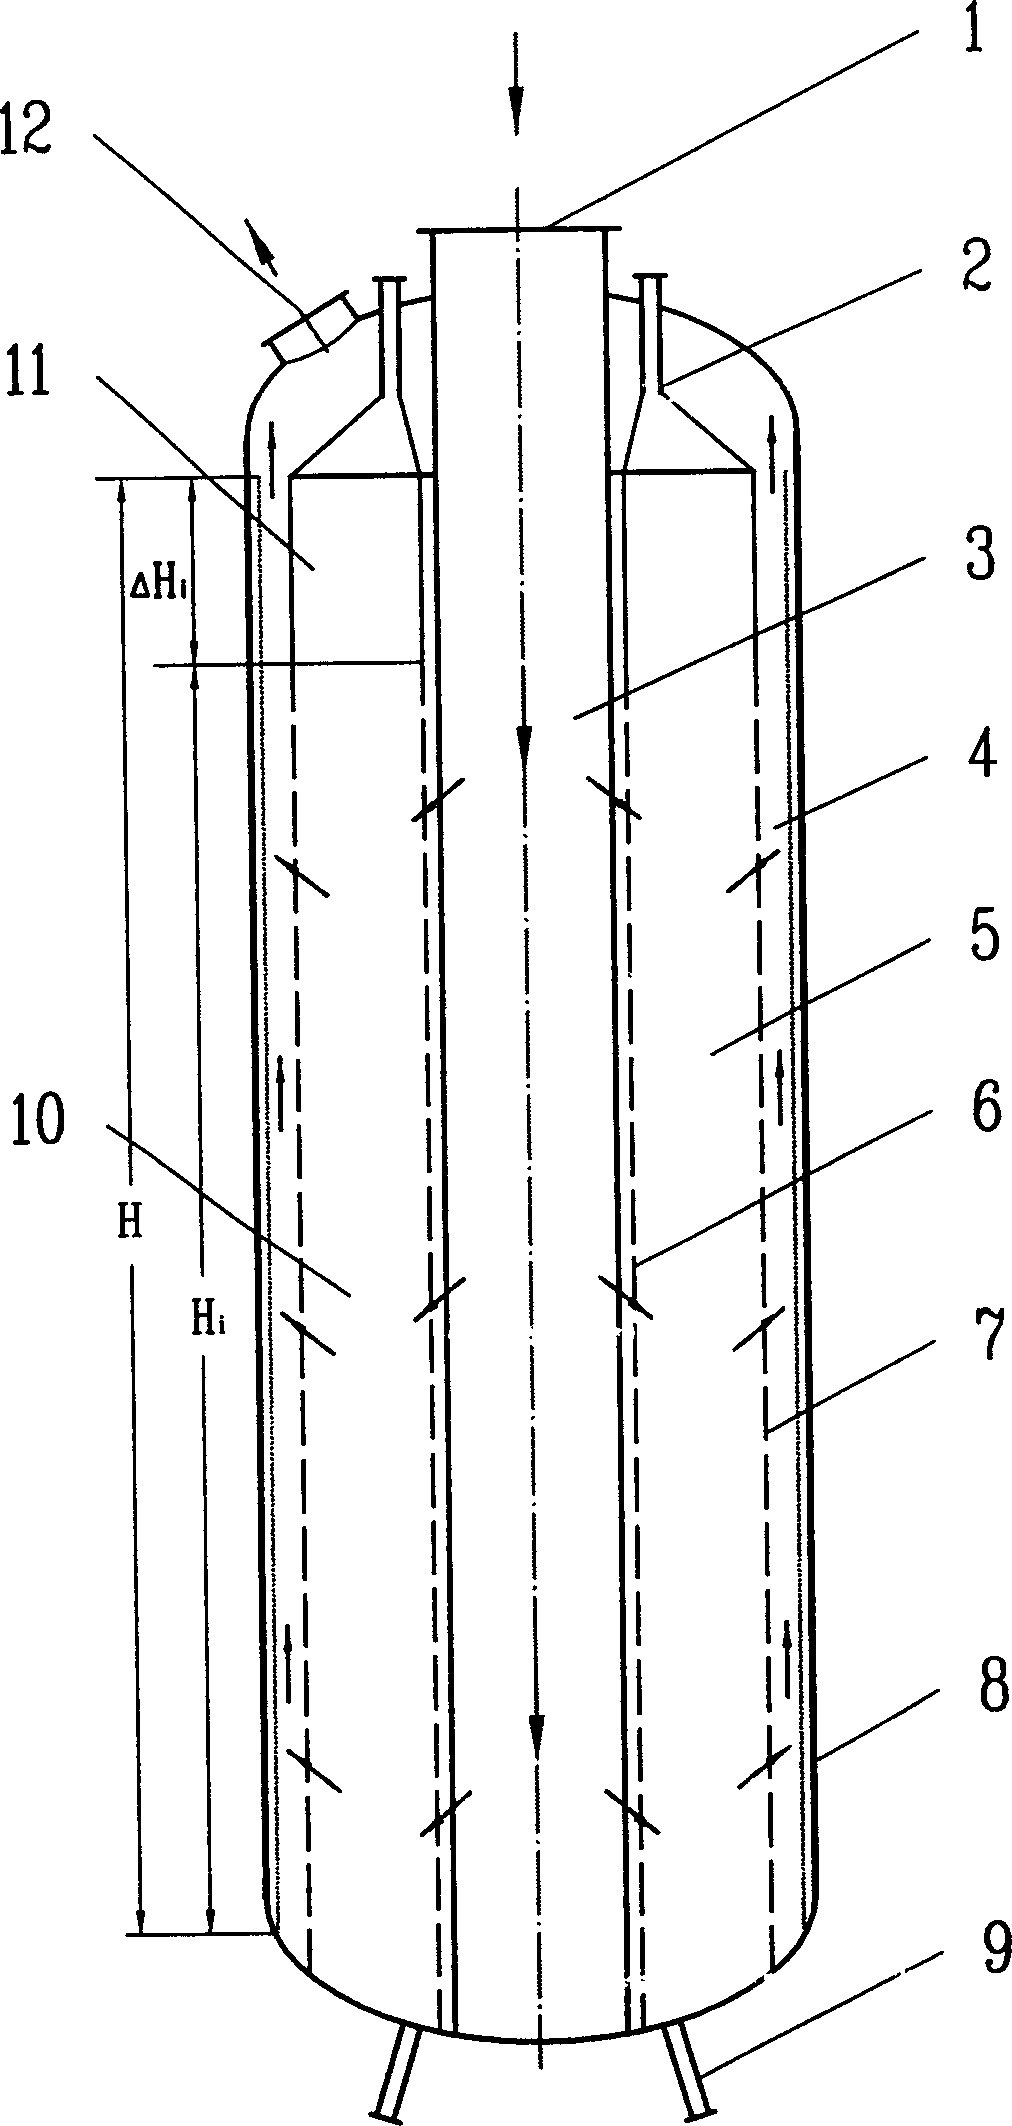 Continuous catalytic reforming and dehydrogenating reactor